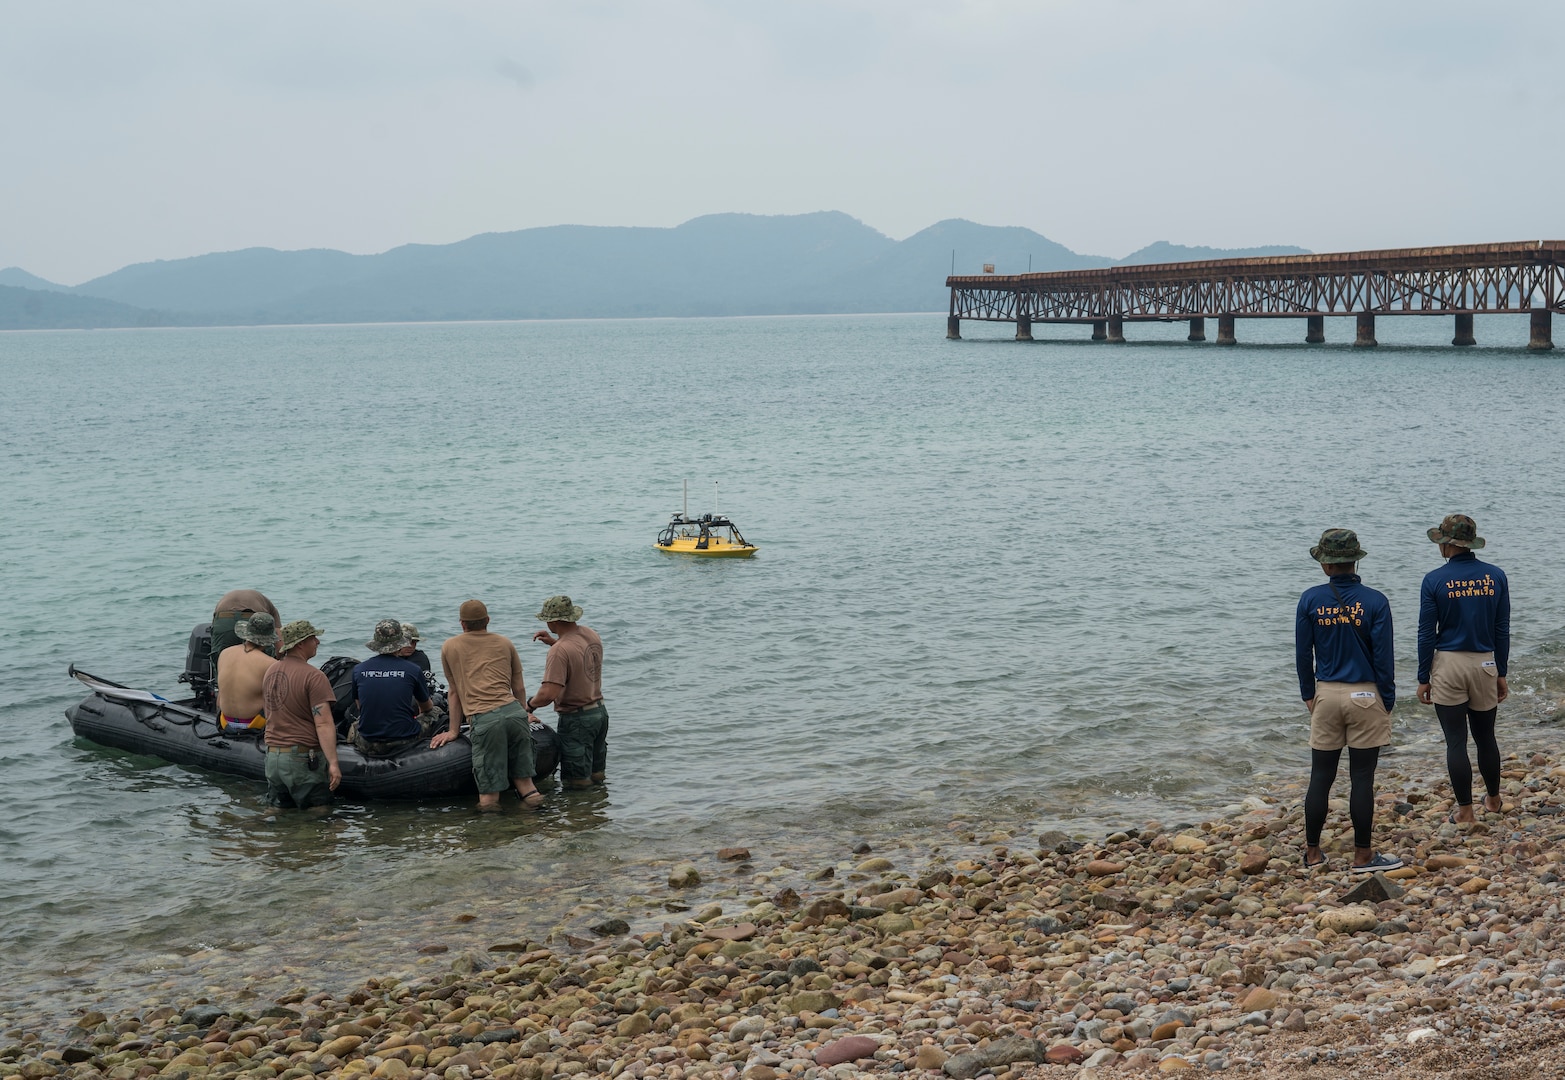 U.S. Navy Sailors assigned to Underwater Construction Team 2, observe a Teledyne Oceanscience Z-Boat 1800 hydrographic survey with Republic of Korea Navy and Royal Thai Navy UCT in Sattahip, Thailand for Exercise Cobra Gold Feb. 19, 2018. Cobra Gold 18 provides a venue for the United States, allied and partner nations to advance interoperability and increase partner capacity in planning and executing complex and realistic multinational force and combined task force operations.